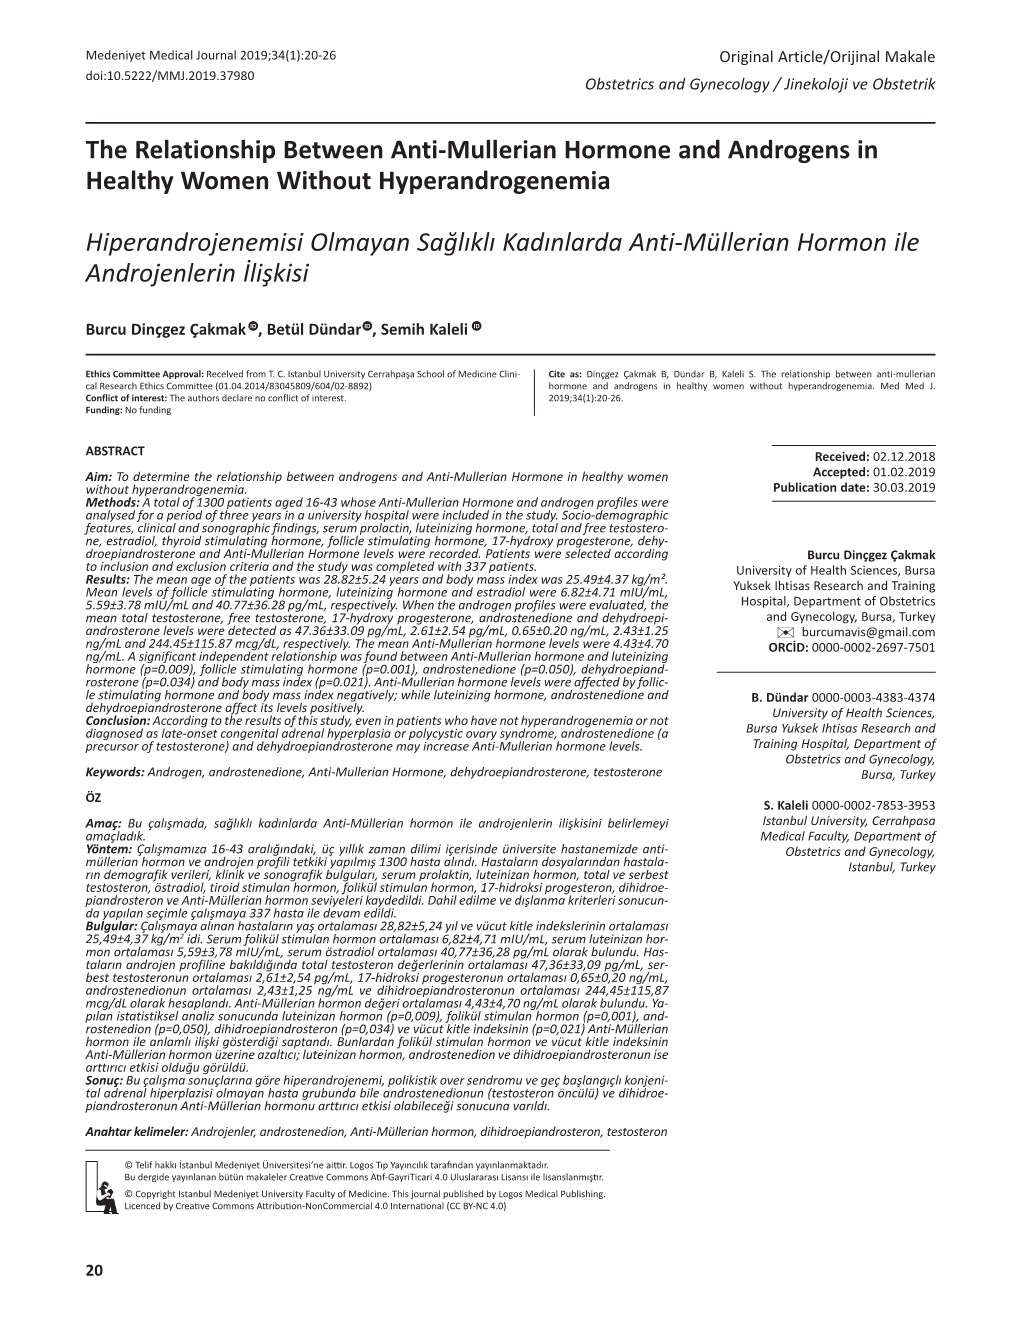 The Relationship Between Anti-Mullerian Hormone and Androgens in Healthy Women Without Hyperandrogenemia